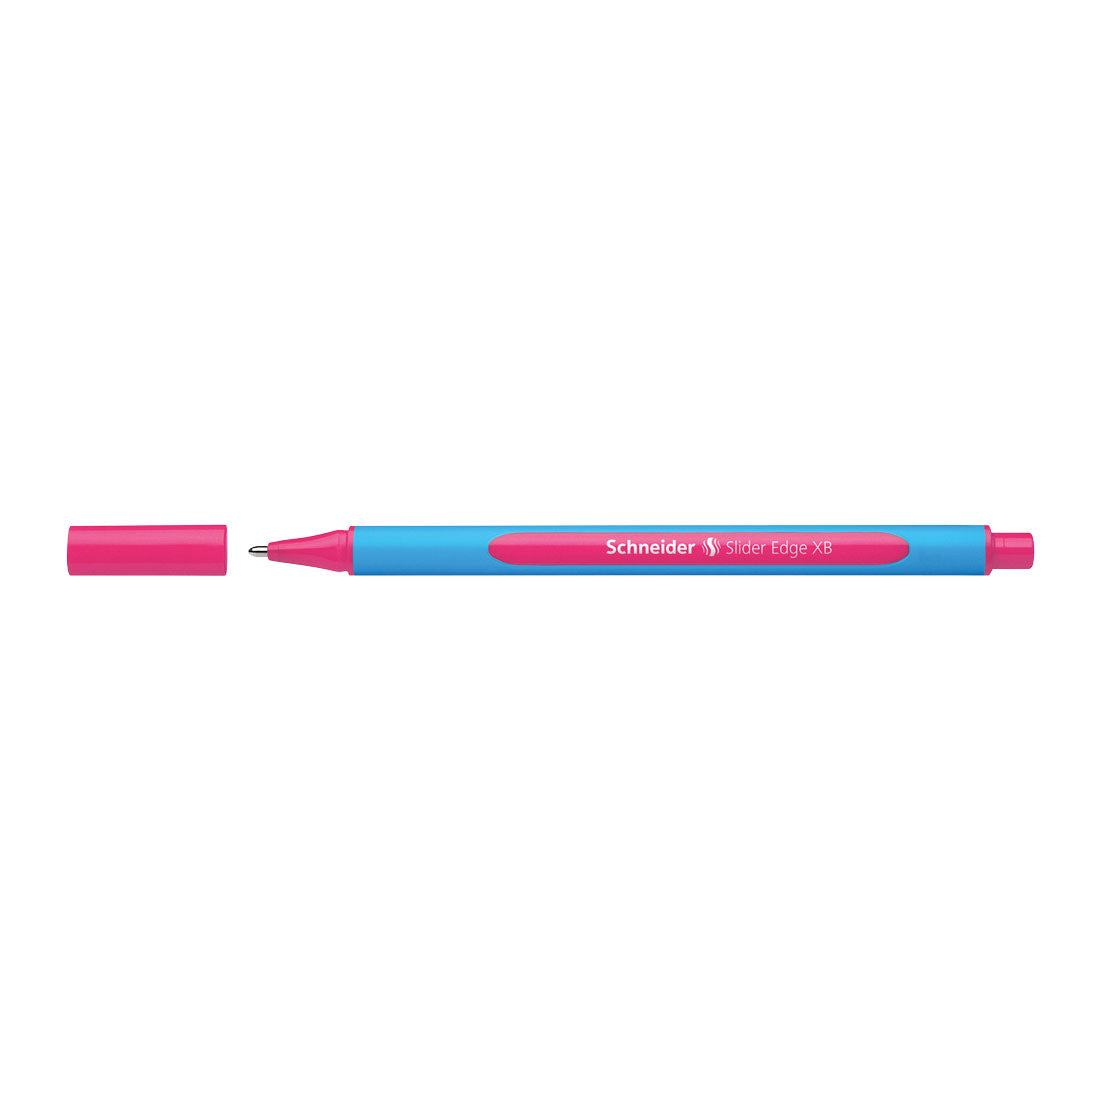 Edge Ballpoint Pen XB, Box of 10#ink-color_pink